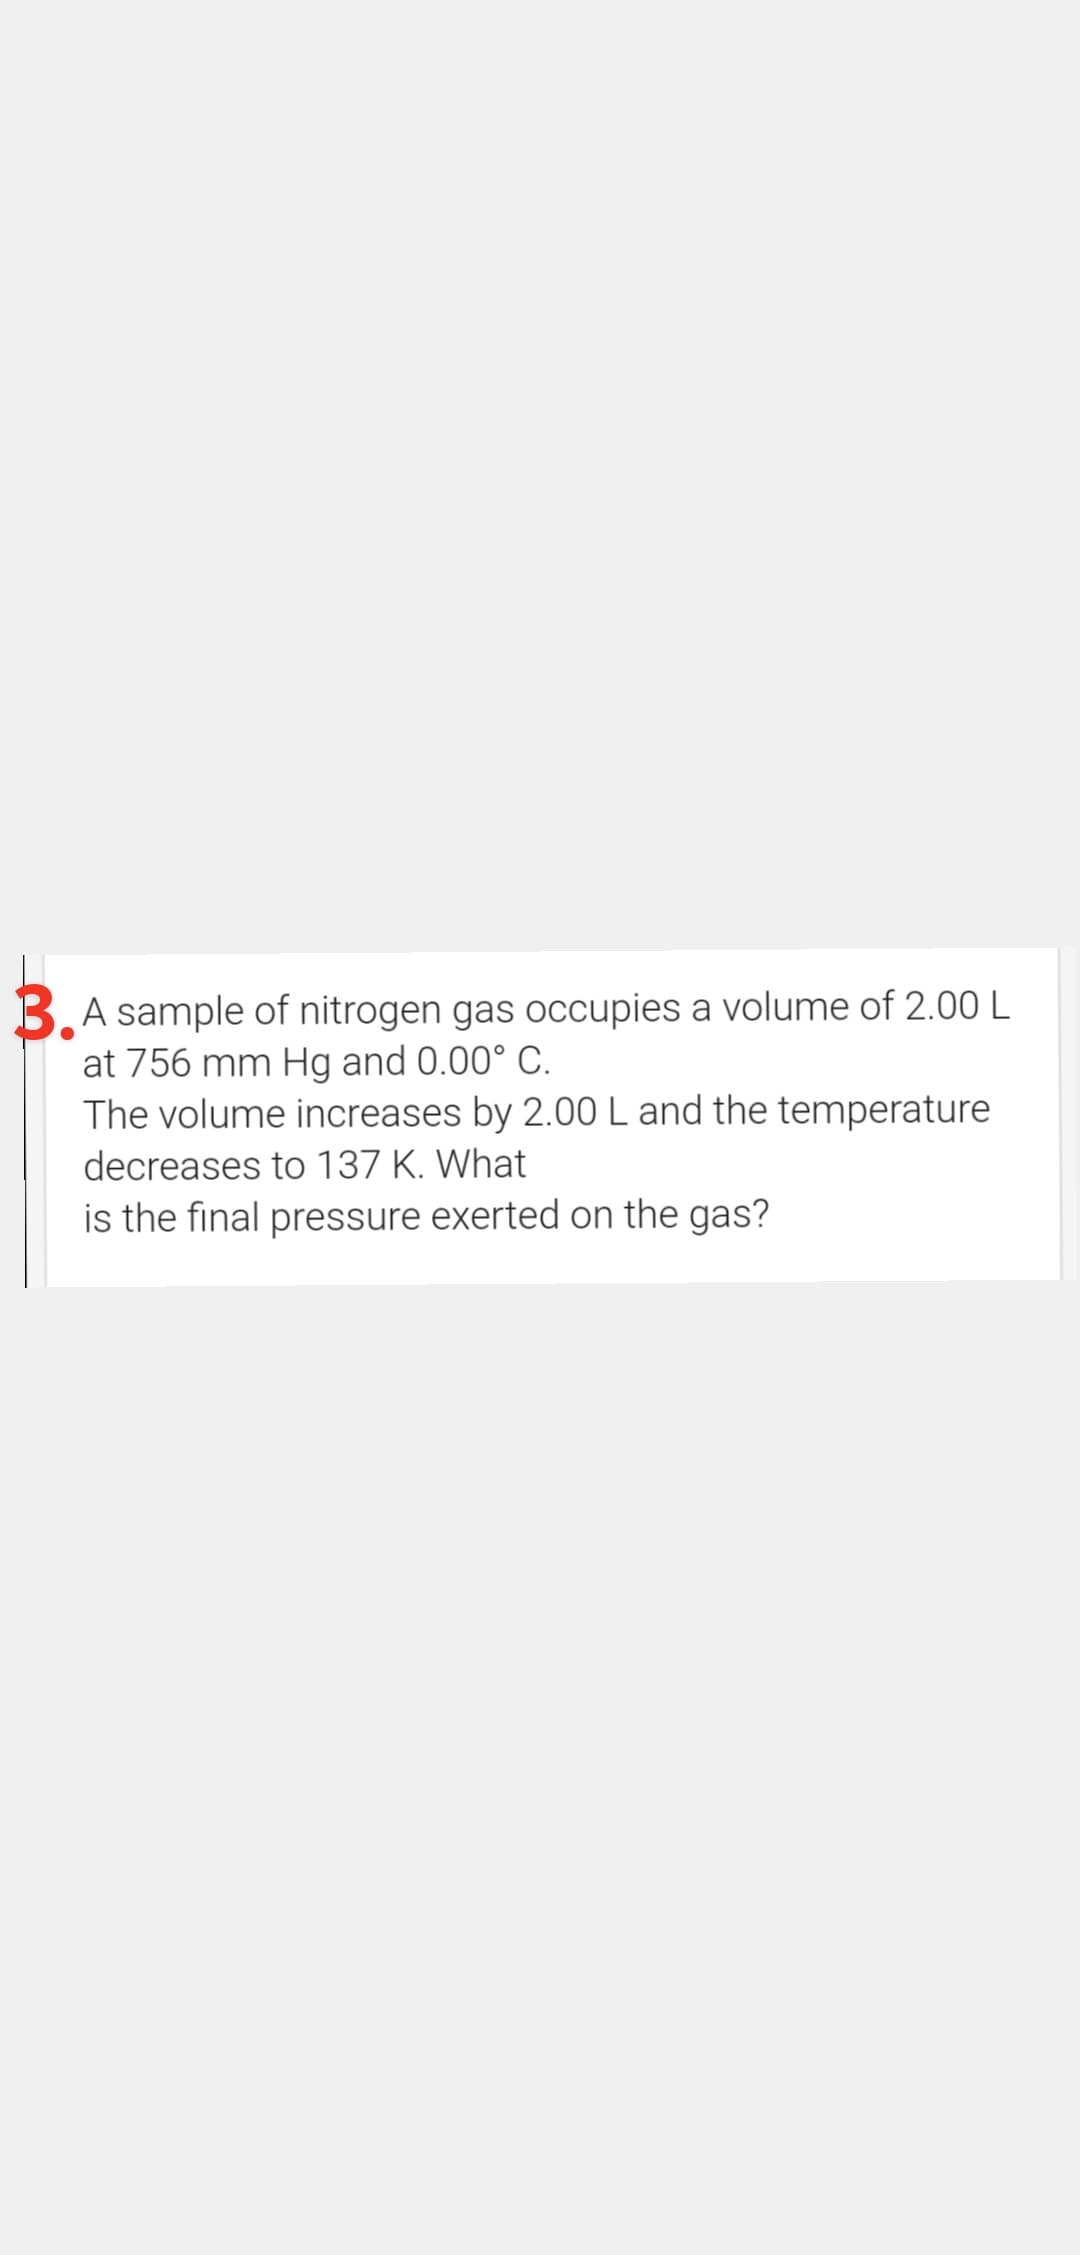 B.A sample of nitrogen gas occupies a volume of 2.00 L
at 756 mm Hg and 0.00° C.
The volume increases by 2.00L and the temperature
decreases to 137 K. What
is the final pressure exerted on the gas?
